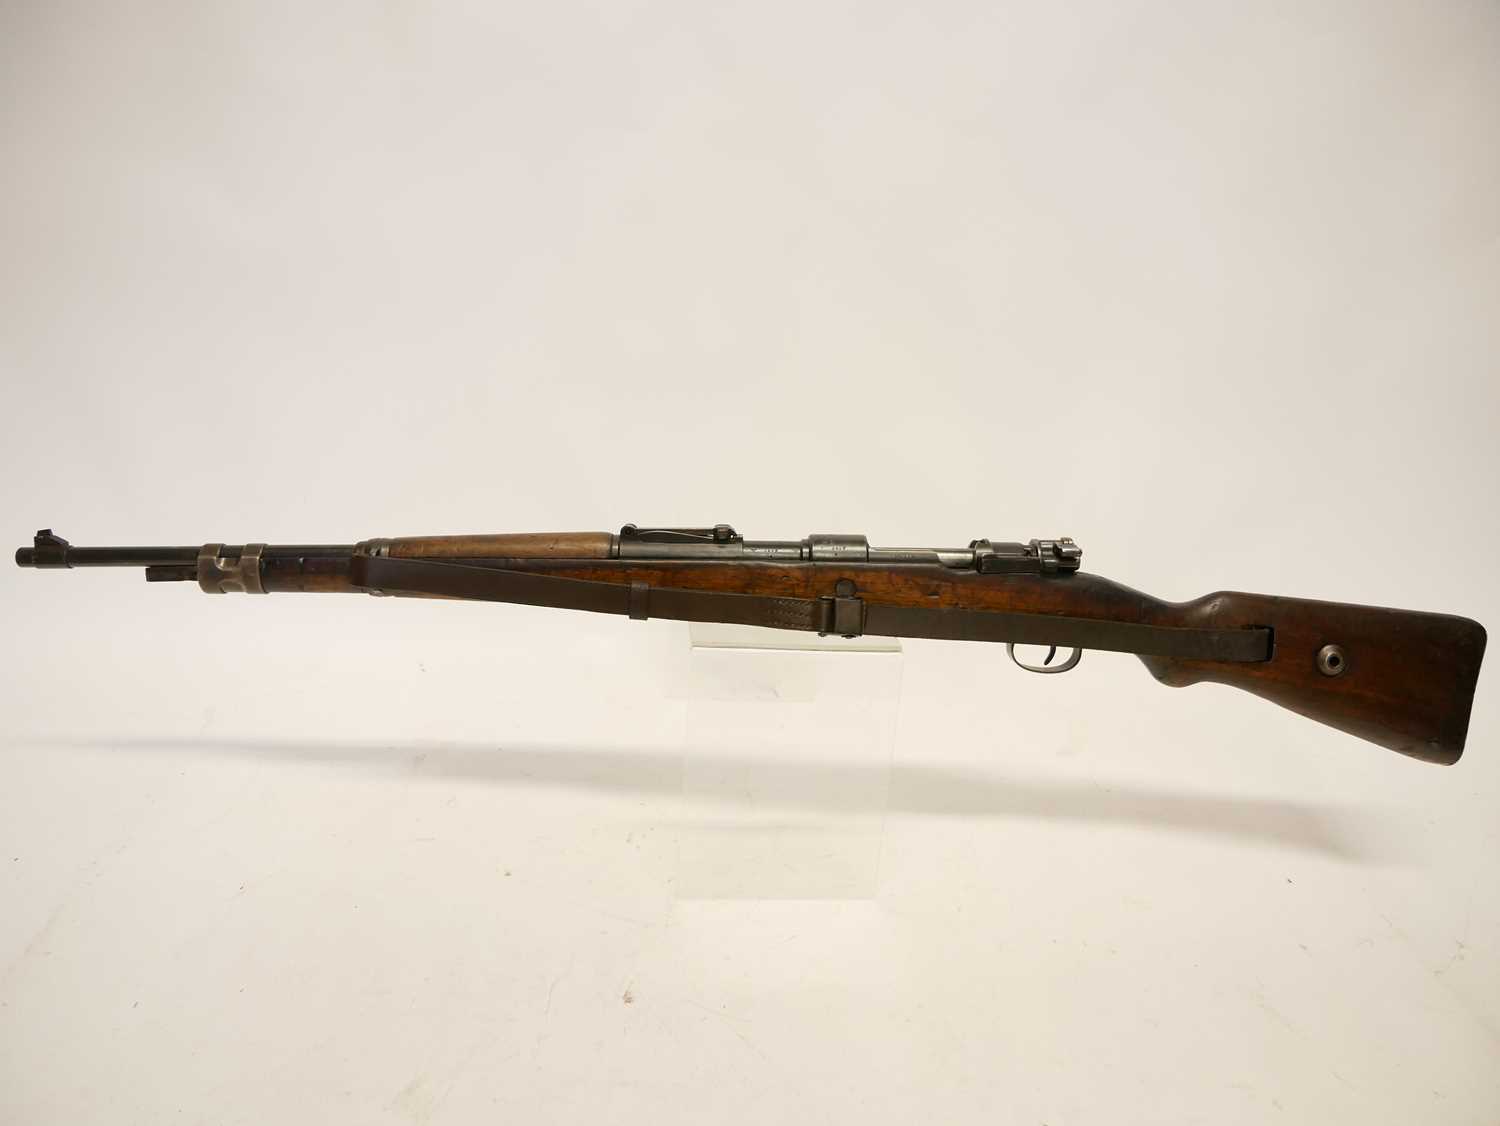 Deactivated WWII Waffenamt maked K98 7.92 bolt action rifle - Image 13 of 15